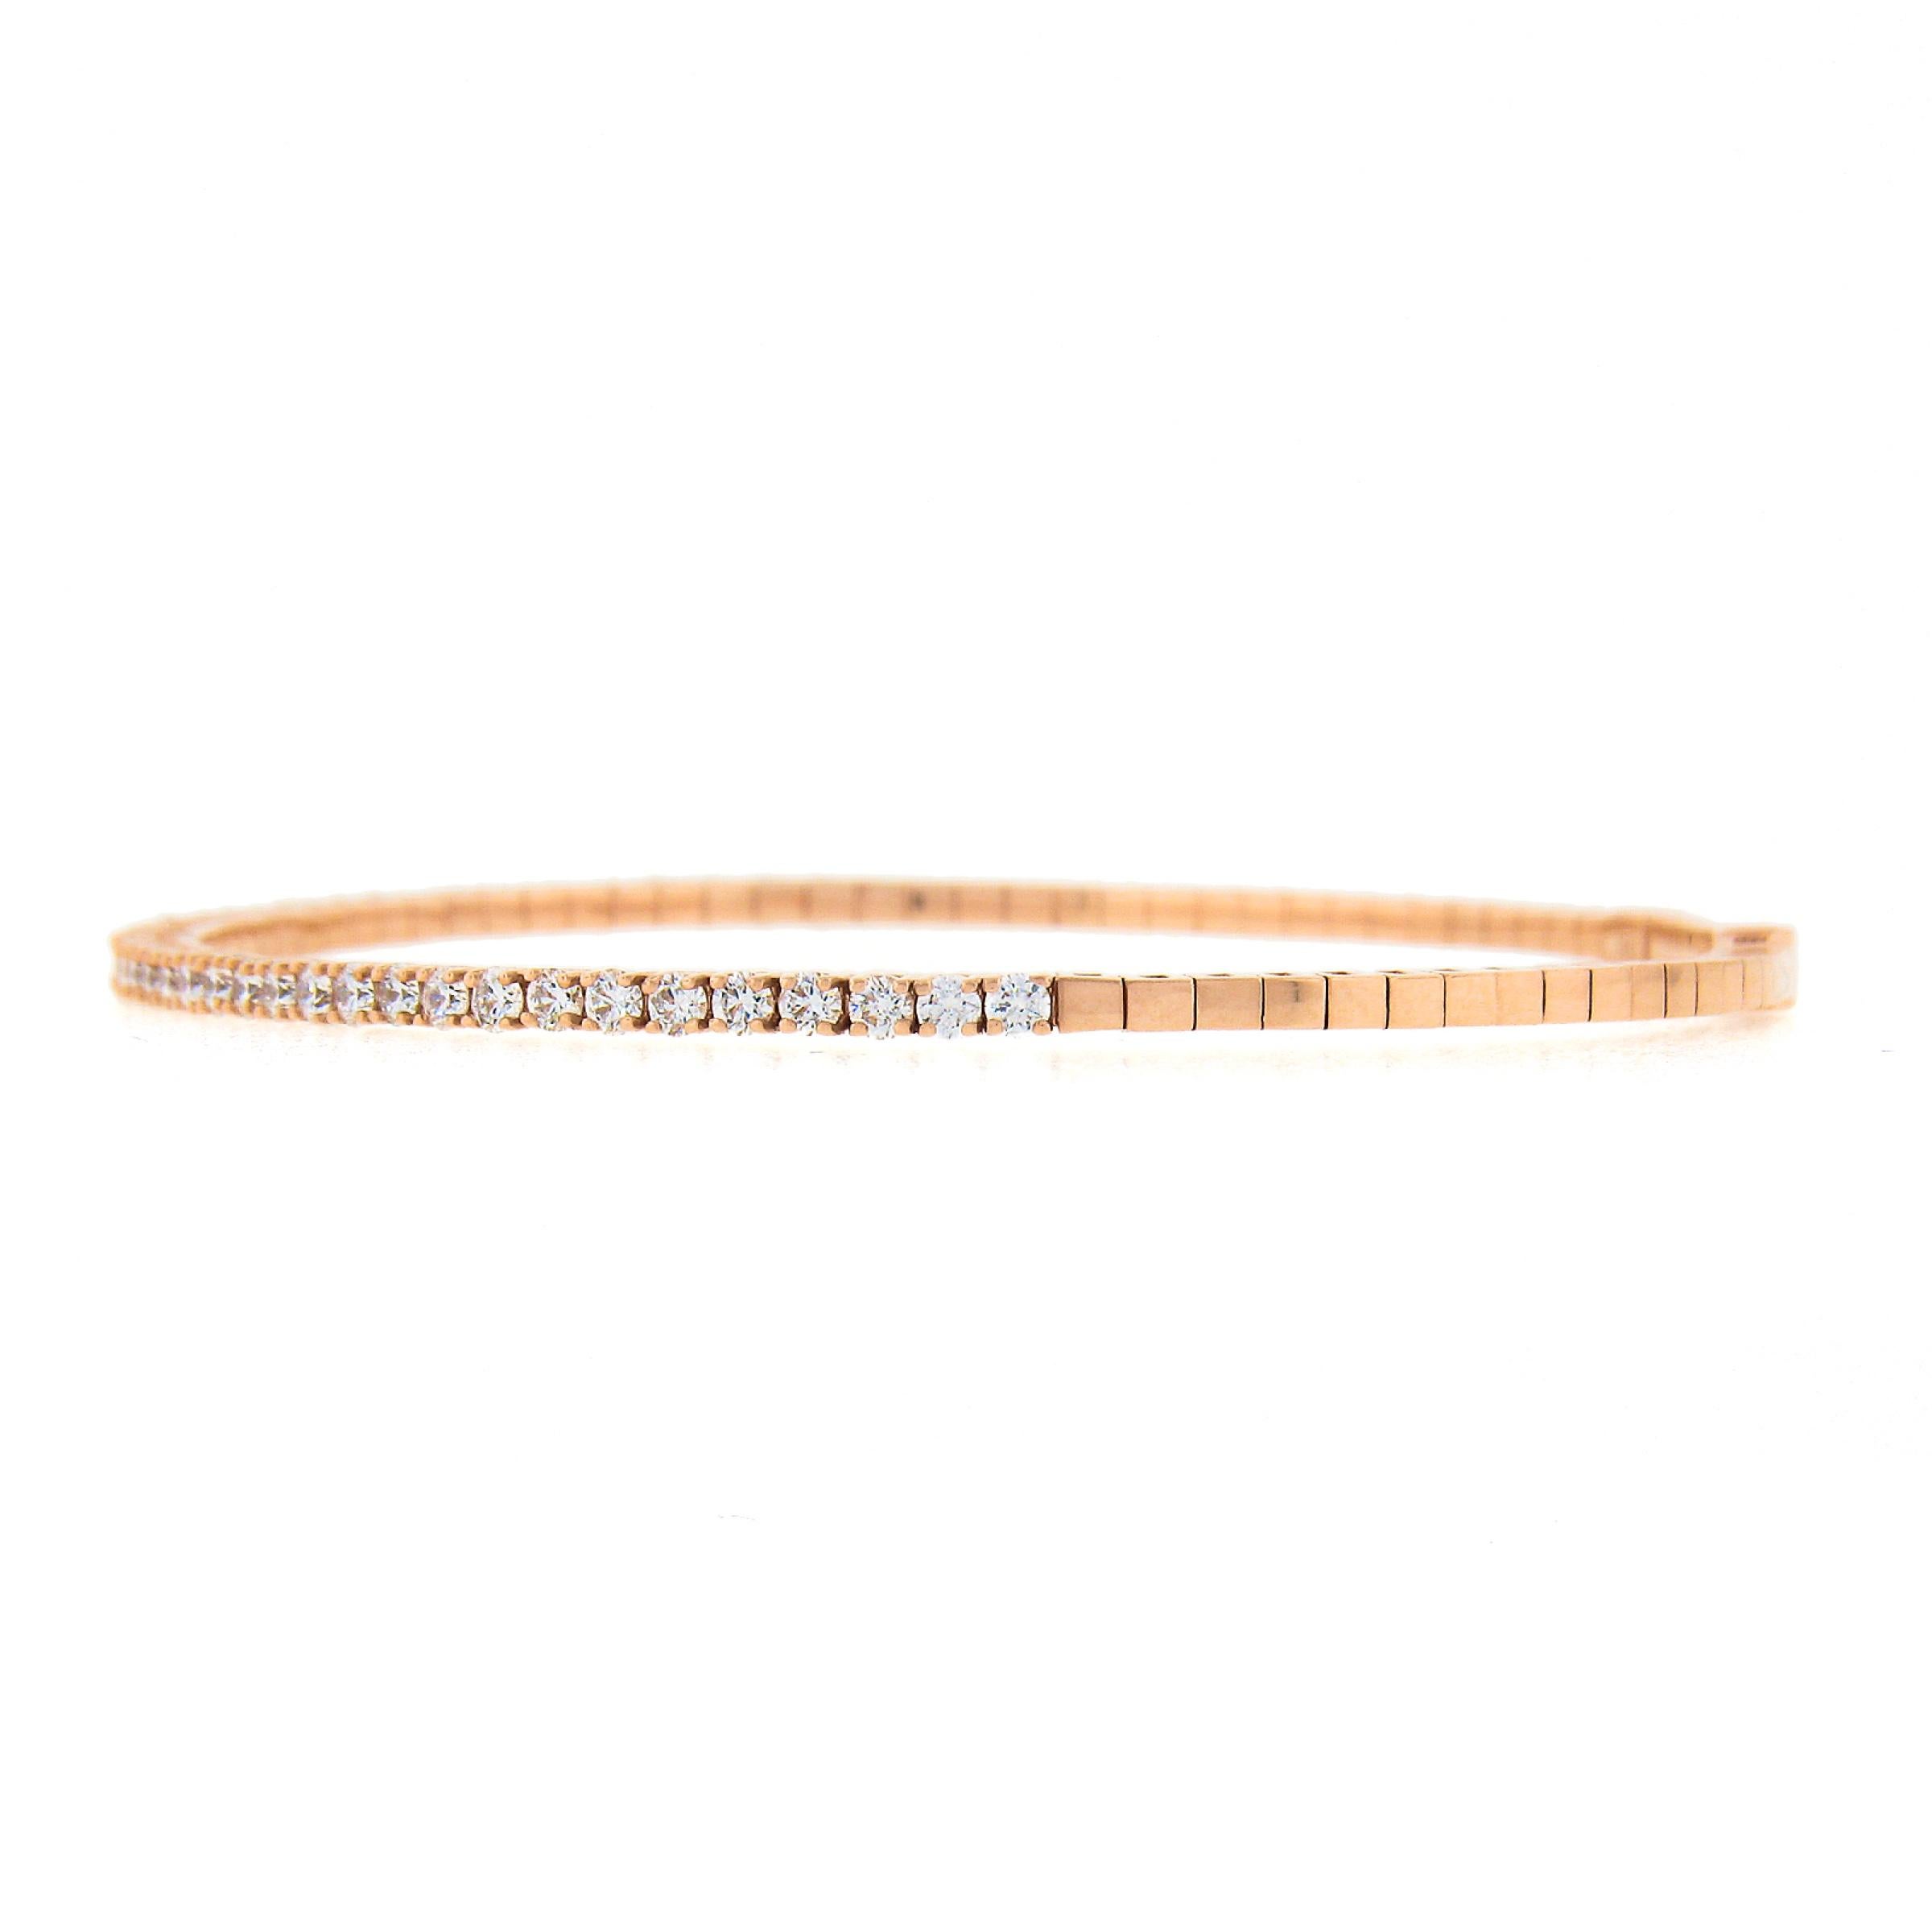 This beautiful, semi-flexible, bangle bracelet was newly crafted in solid 14k rose gold and features very fine quality diamonds neatly set across its top. These fiery diamonds are round brilliant cut and total exactly 1.14 carats, displaying